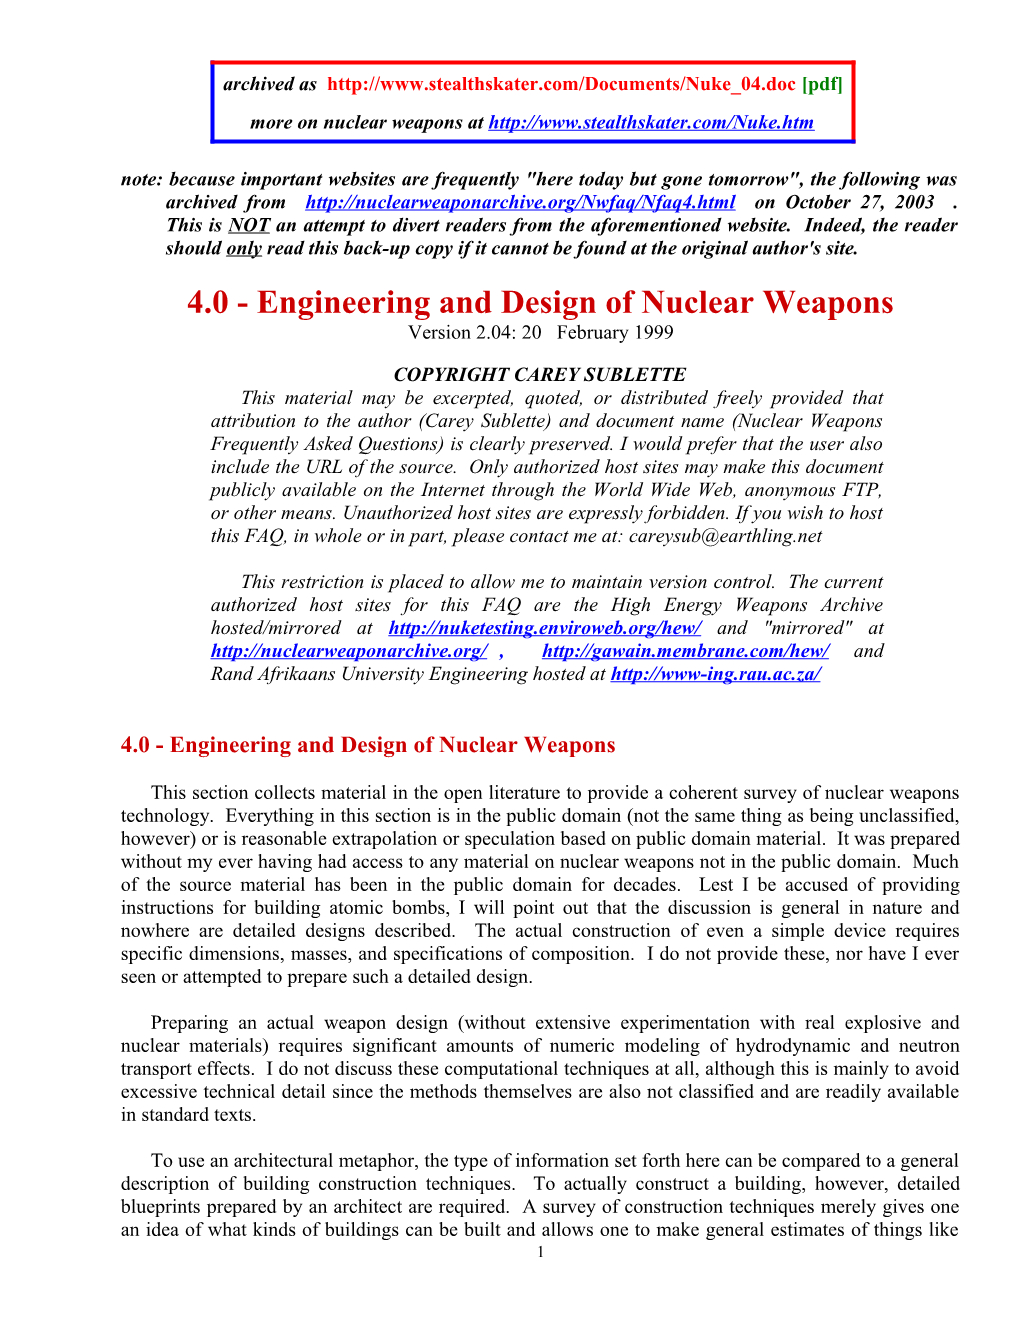 4.0 - Engineering and Design of Nuclear Weapons